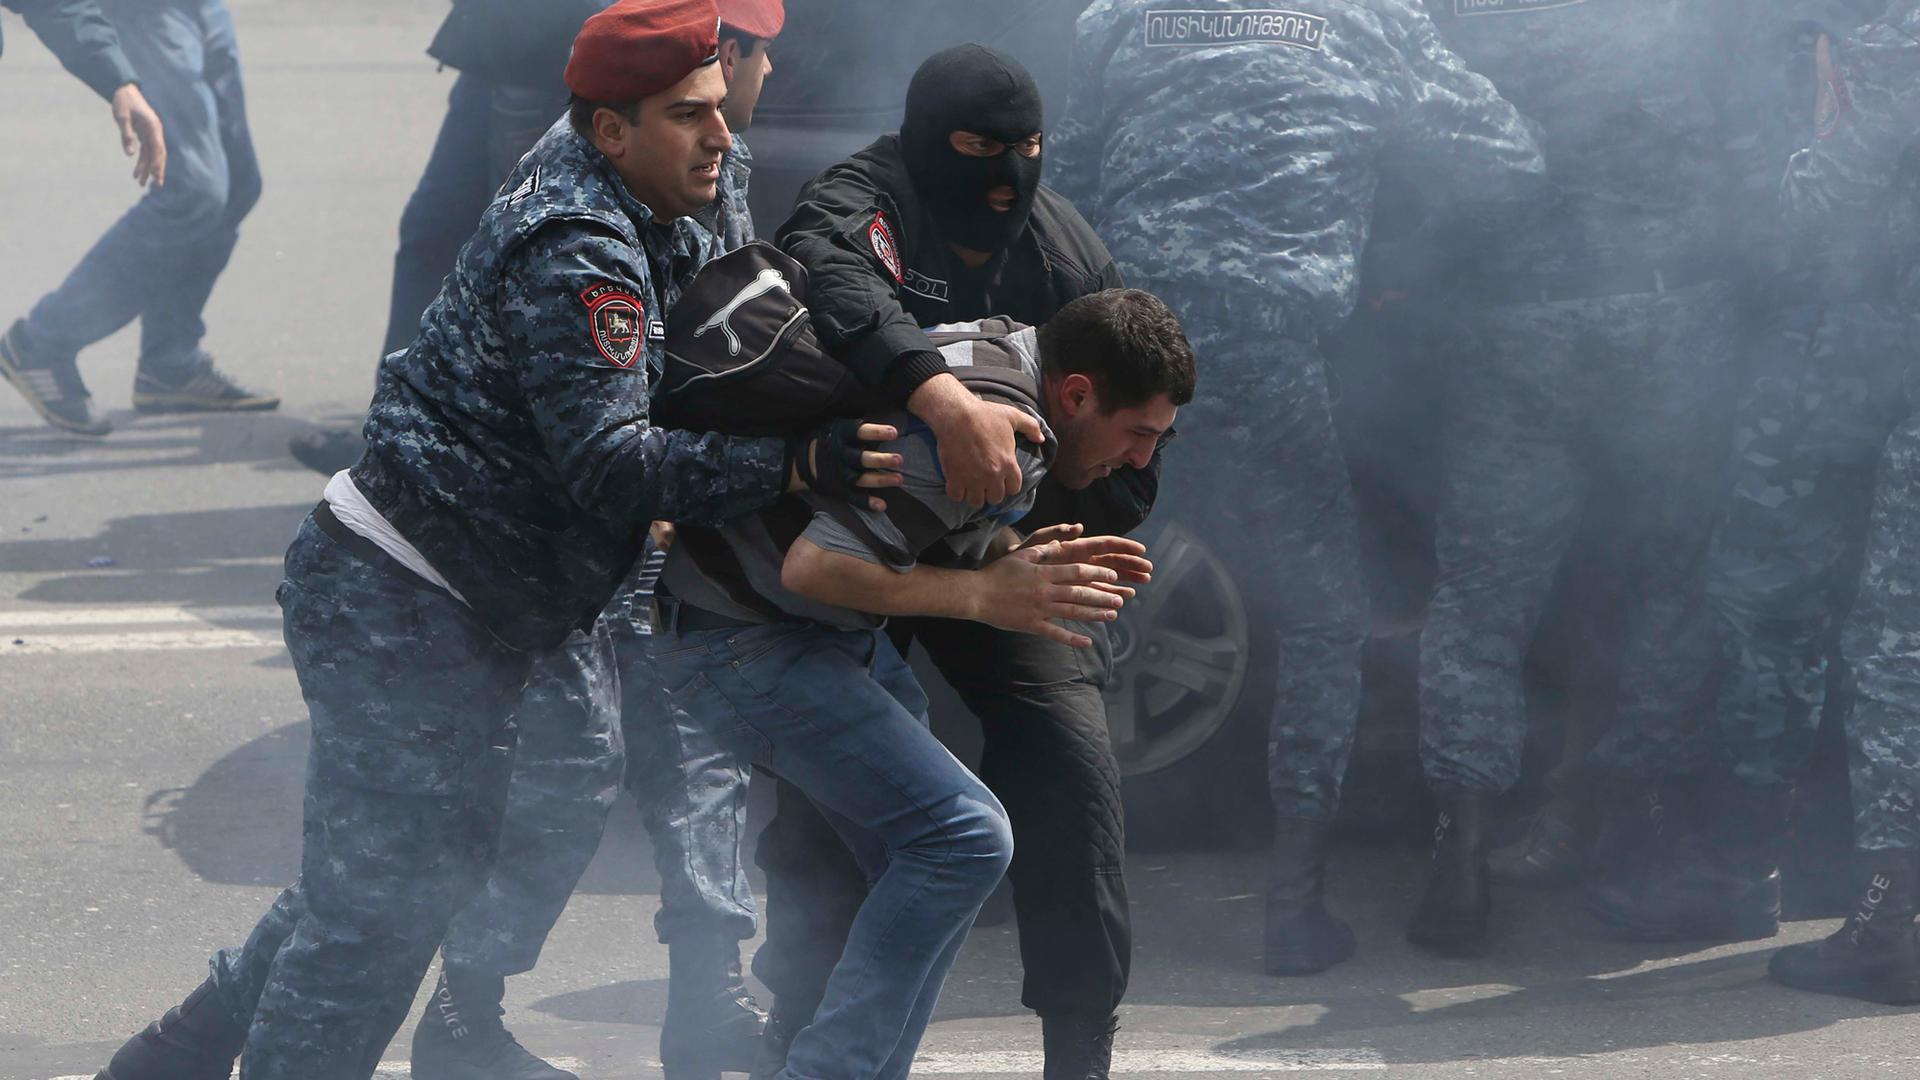 Red beret-wearing Armenian law enforcement officers detain a man during a protest.